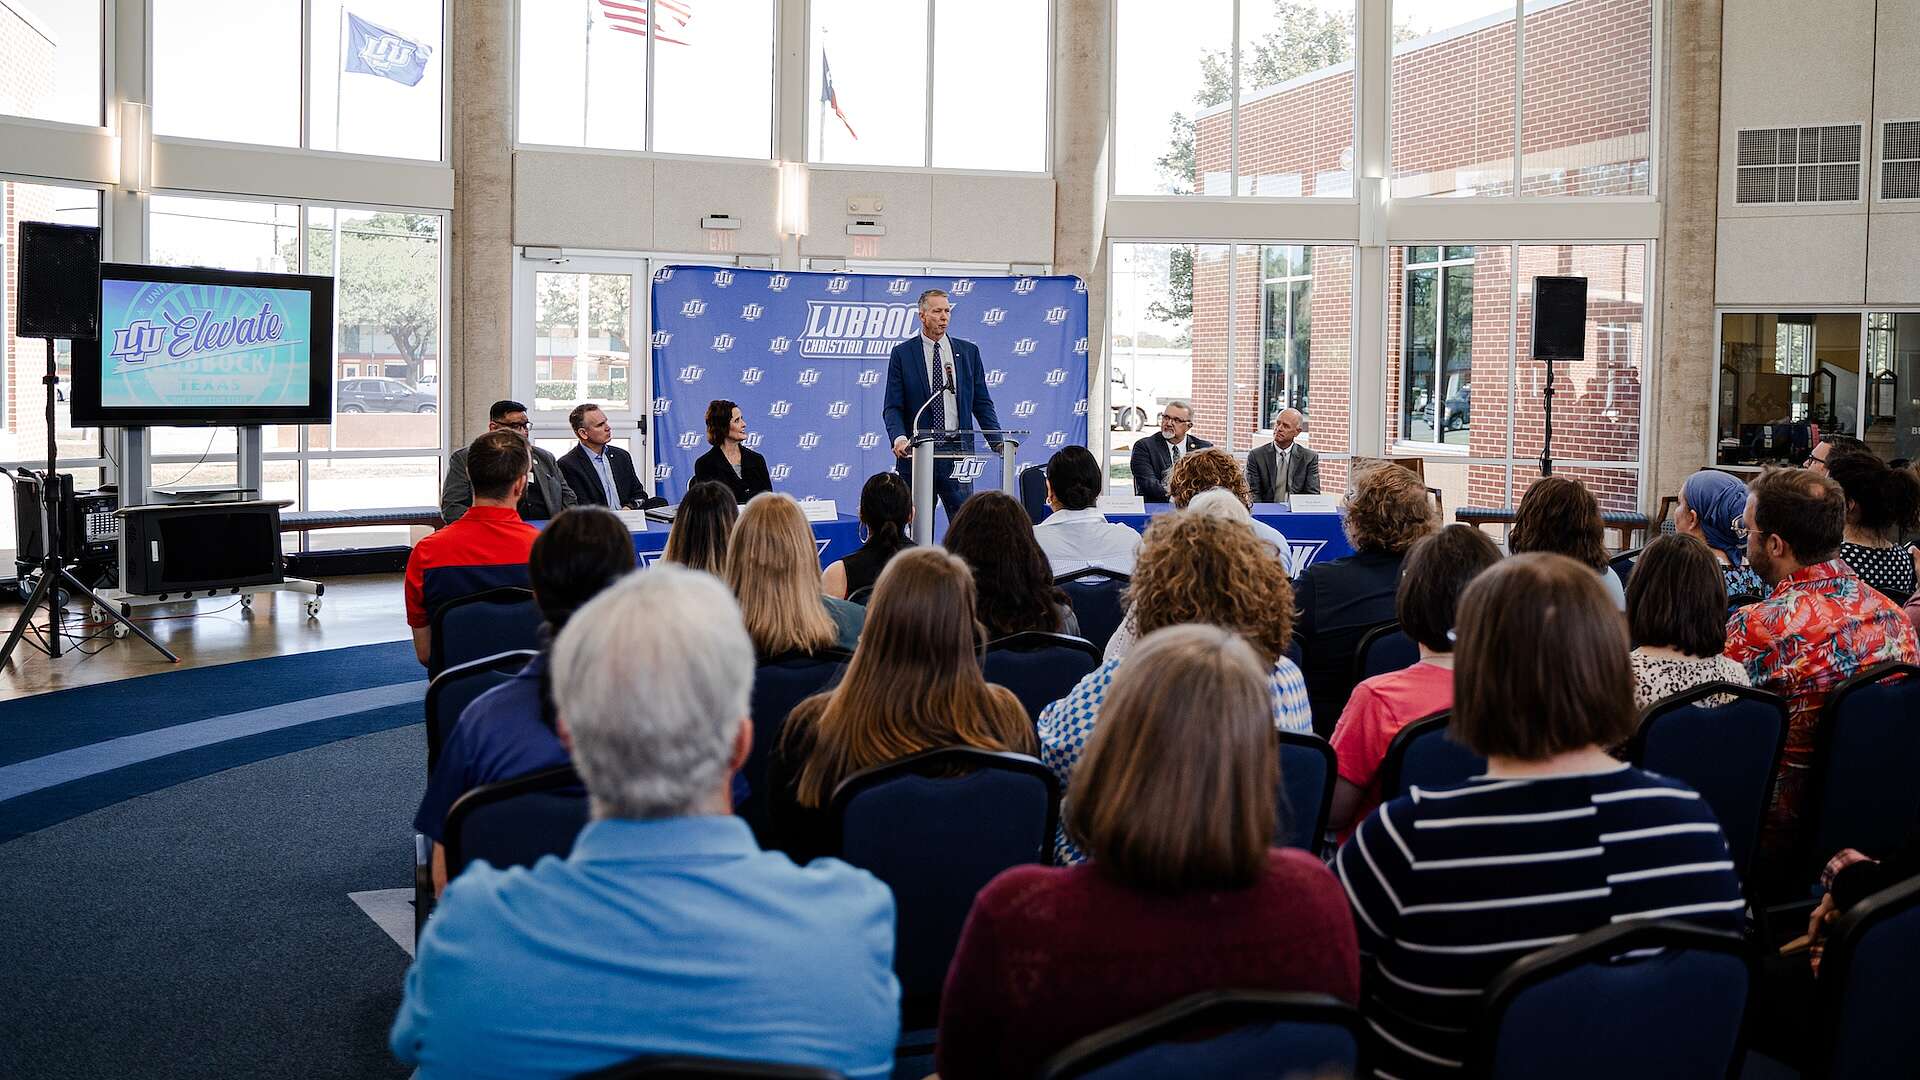 Image of the Press Conference announcing the LCU Elevate initiative